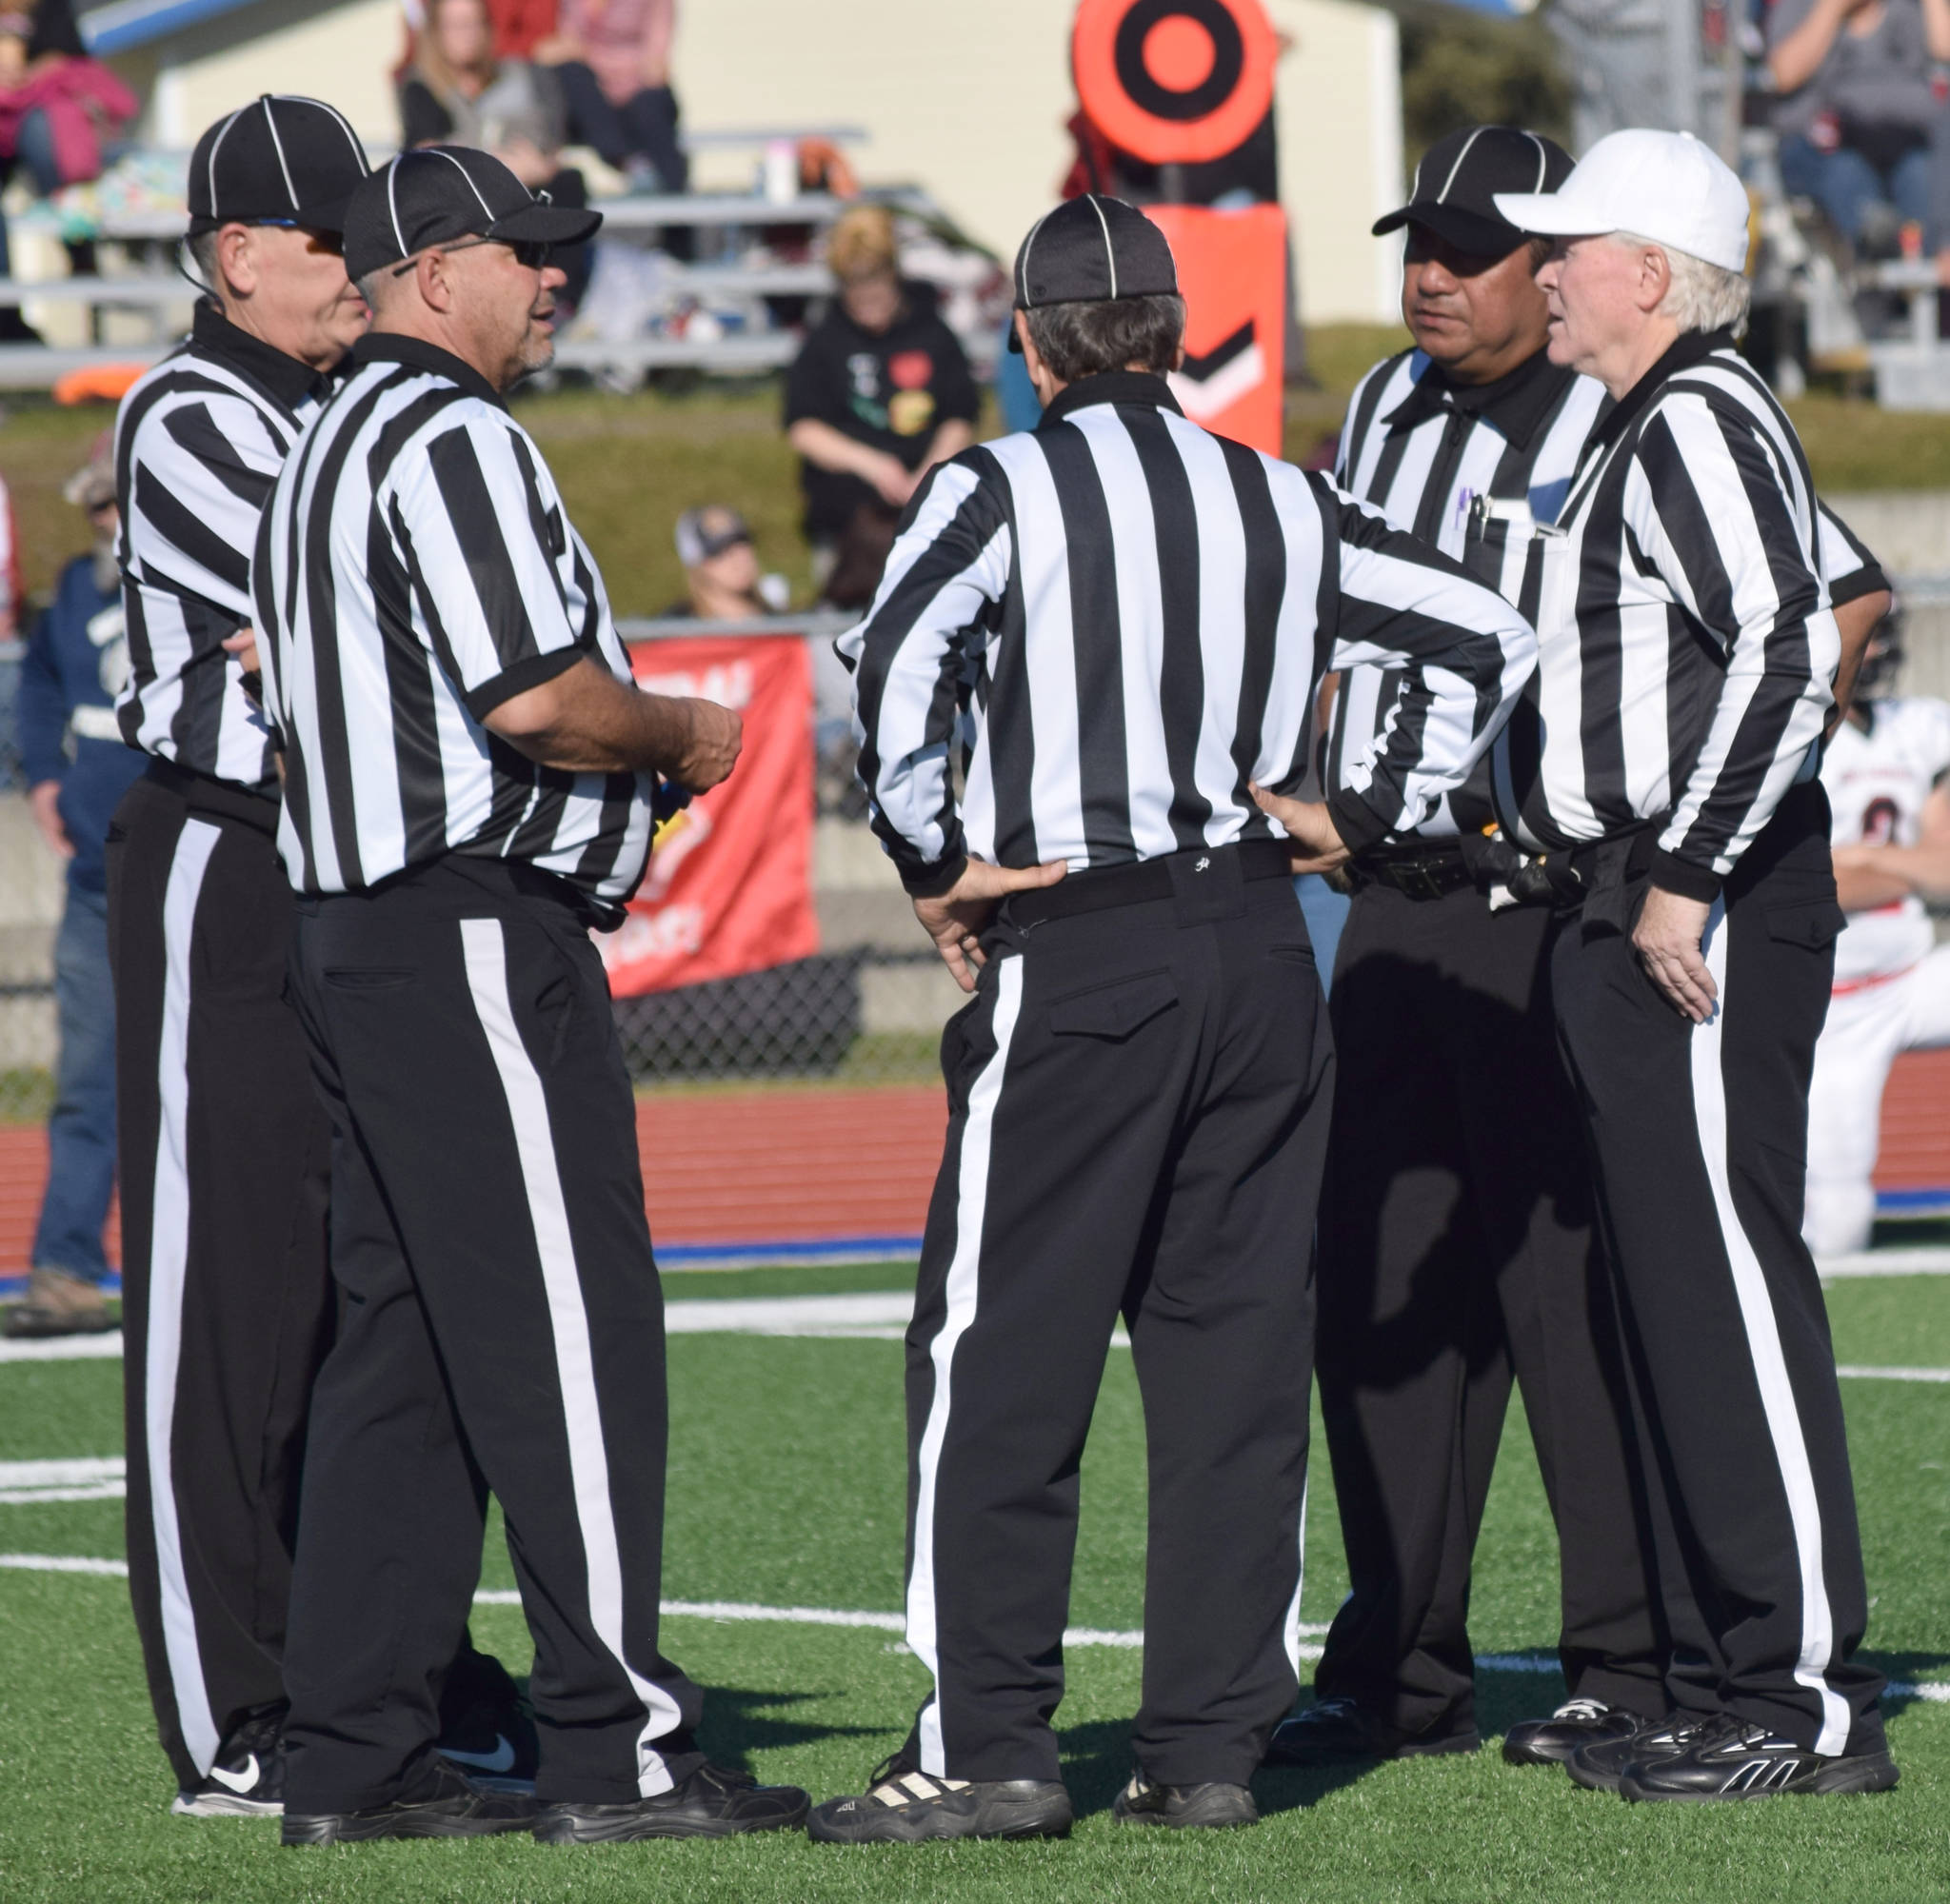 Randy Sparks, far right, confers with his officiating crew Saturday, Sept. 29, 2018, during the Soldotna-Kenai Central game at Justin Maile Field in Soldotna. After 22 years, Sparks was officiating his late game on the Kenai Peninsula. (Photo by Jeff Helminiak/Peninsula Clarion)